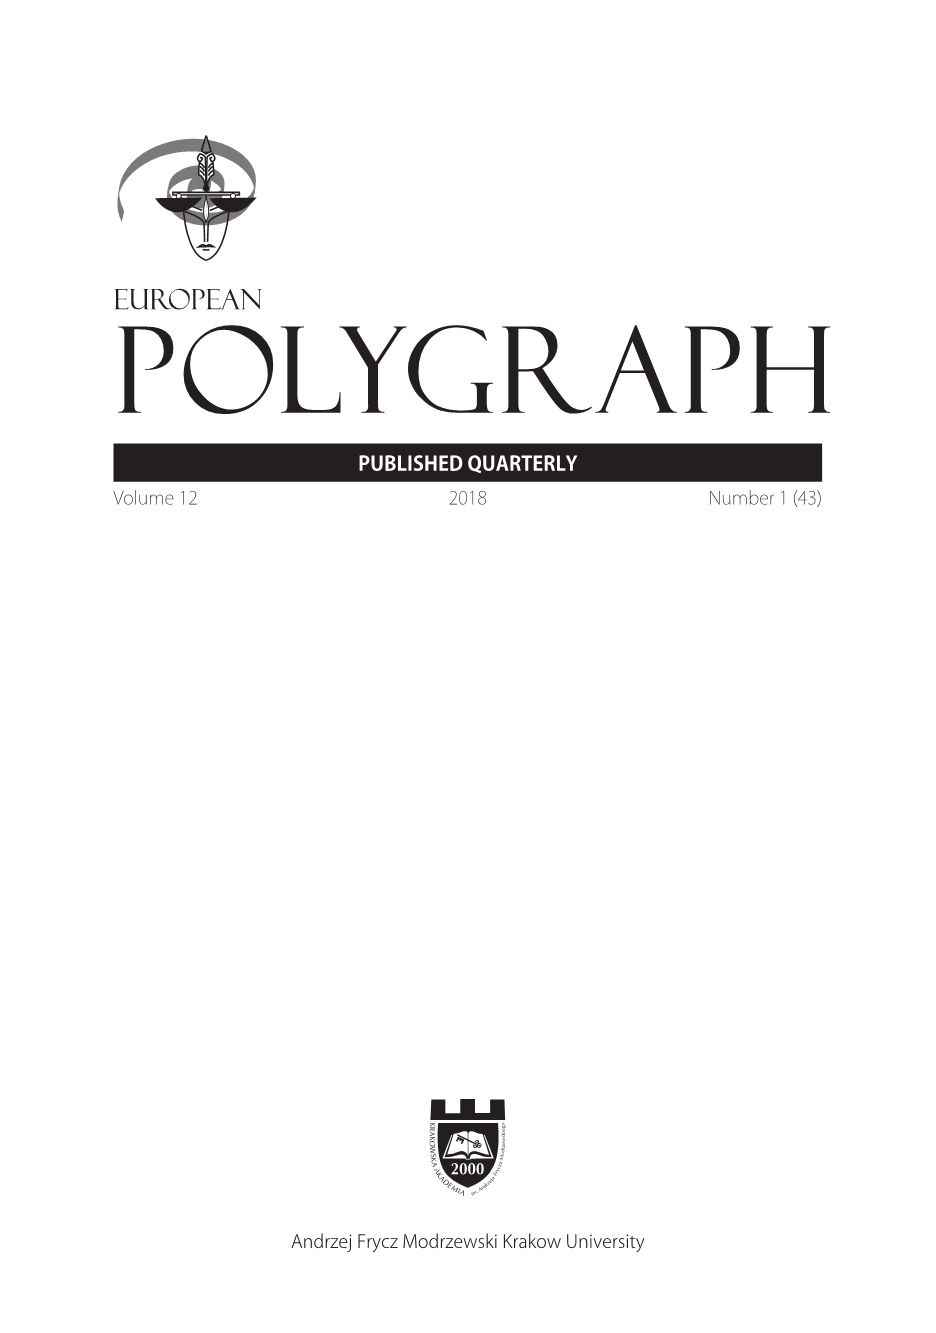 The Eﬀectiveness of fMRI Data when Combined with Polygraph Data Cover Image